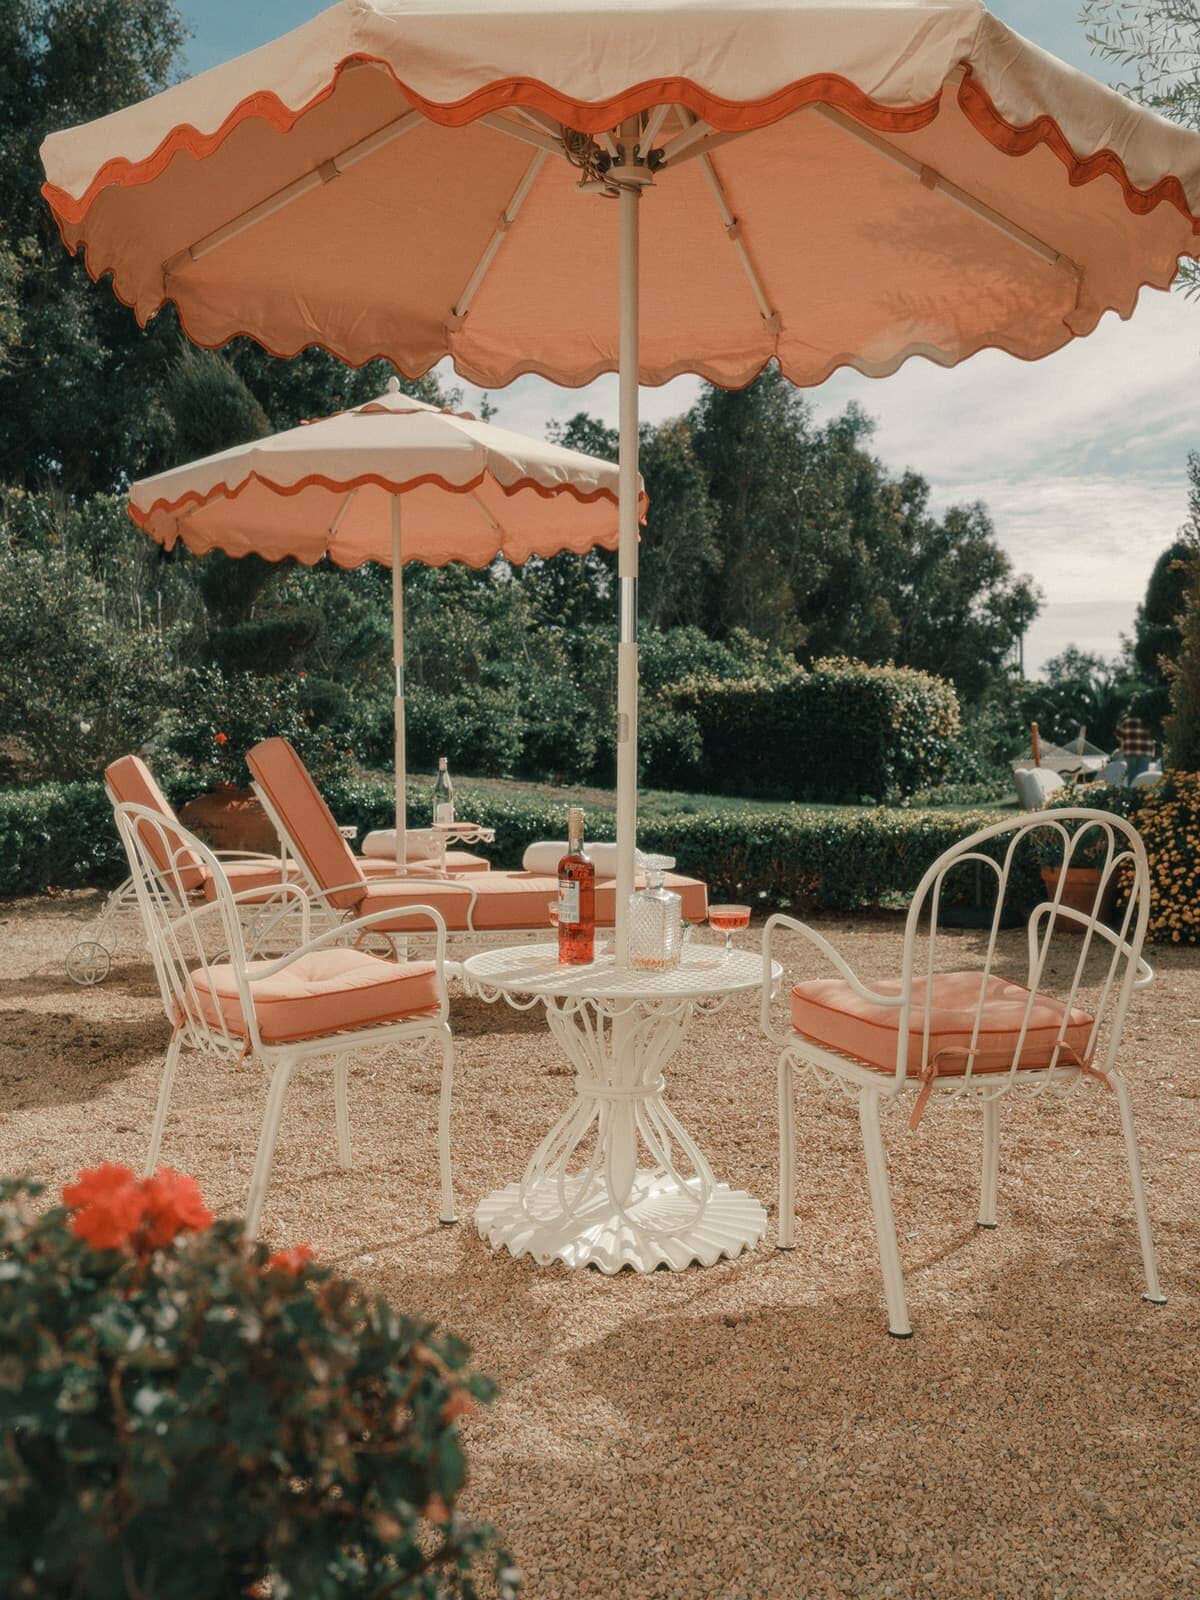 Side table with chairs and pink umbrellas in an outdoor courtyard